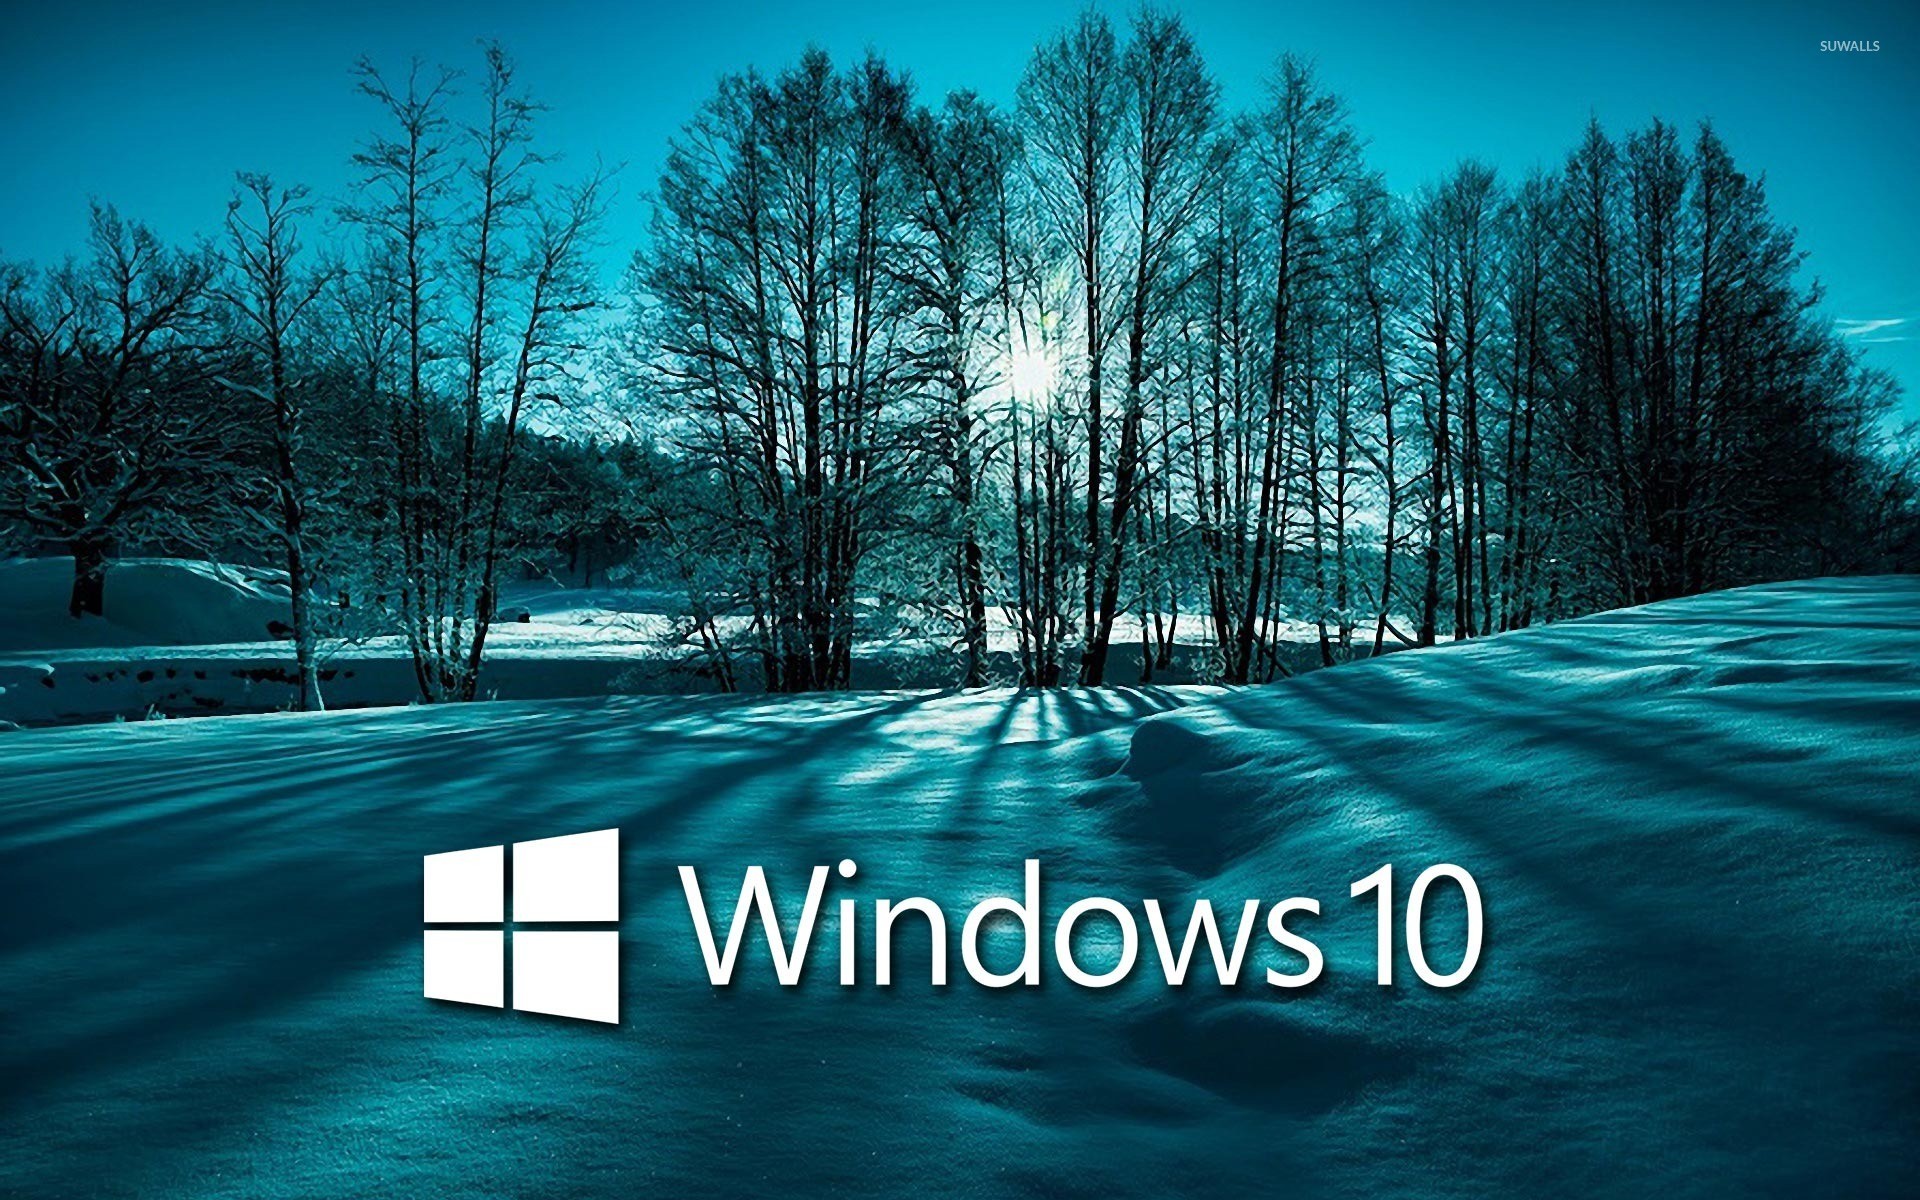 Windows 10 Snowy Mountain Wallpaper (53+ images)